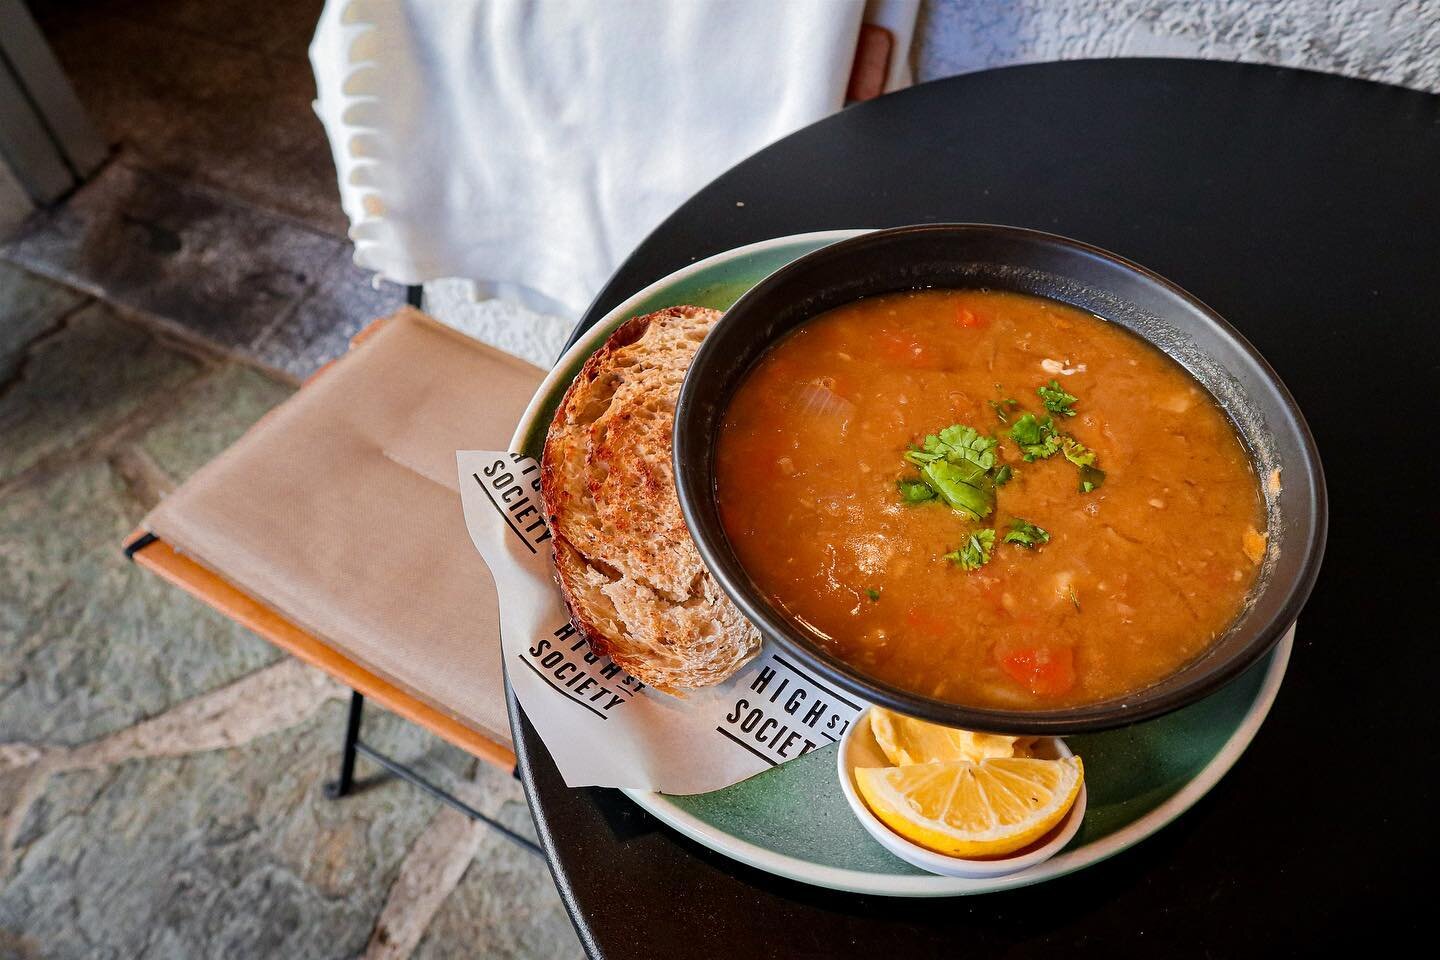 Traditional Nepalese veggies and lentil soup - see what &ldquo;soups&rdquo; you from our broad selection this week. 
.
.
.
#sydneyfood #brunchtime #veggiesoup #lentilsoup #warmandcozy #soupseason